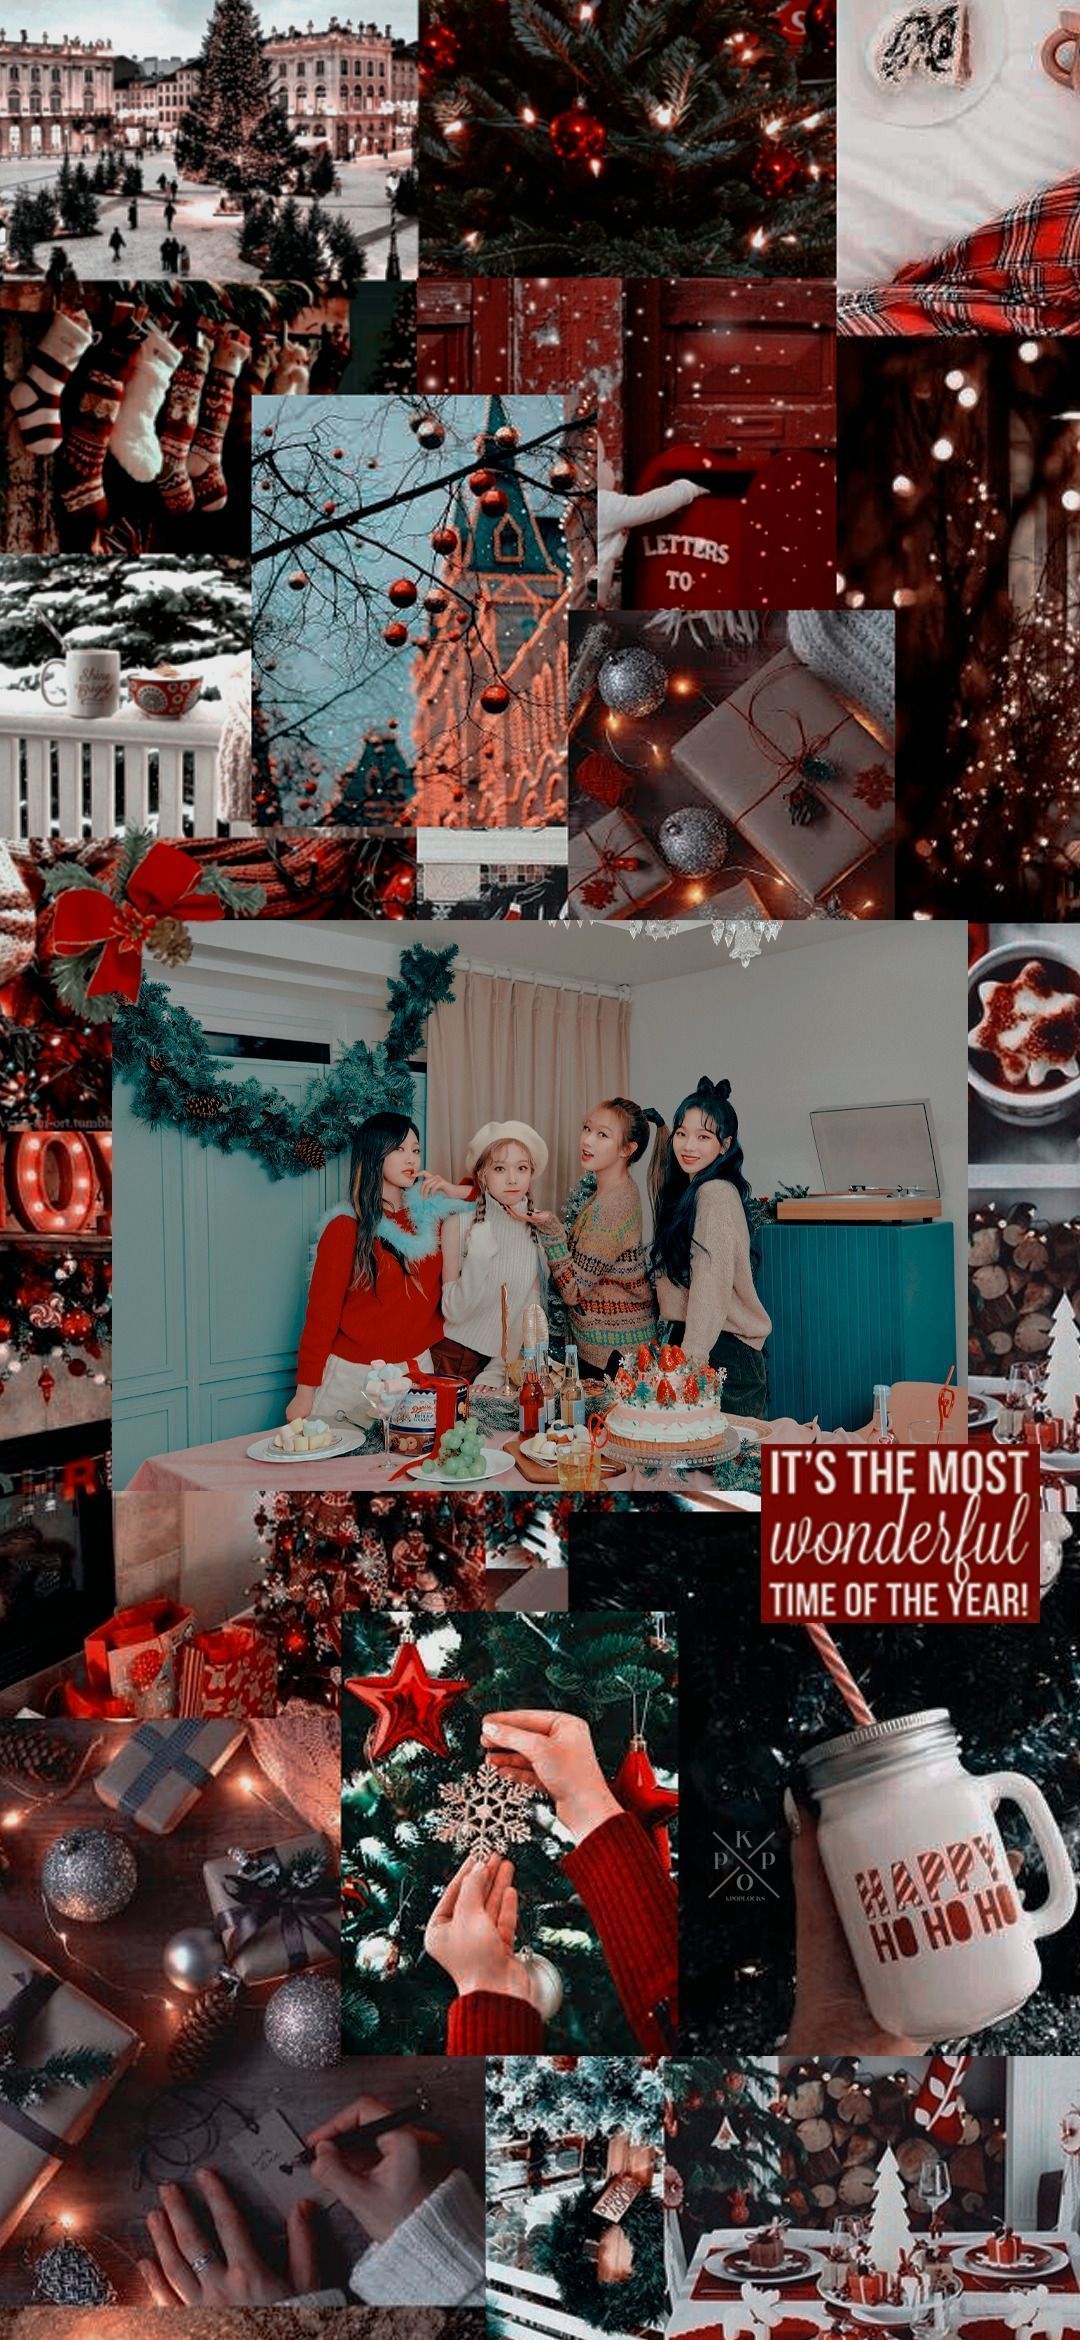 Aesthetic Christmas wallpaper for phone with red and black colors - Aespa